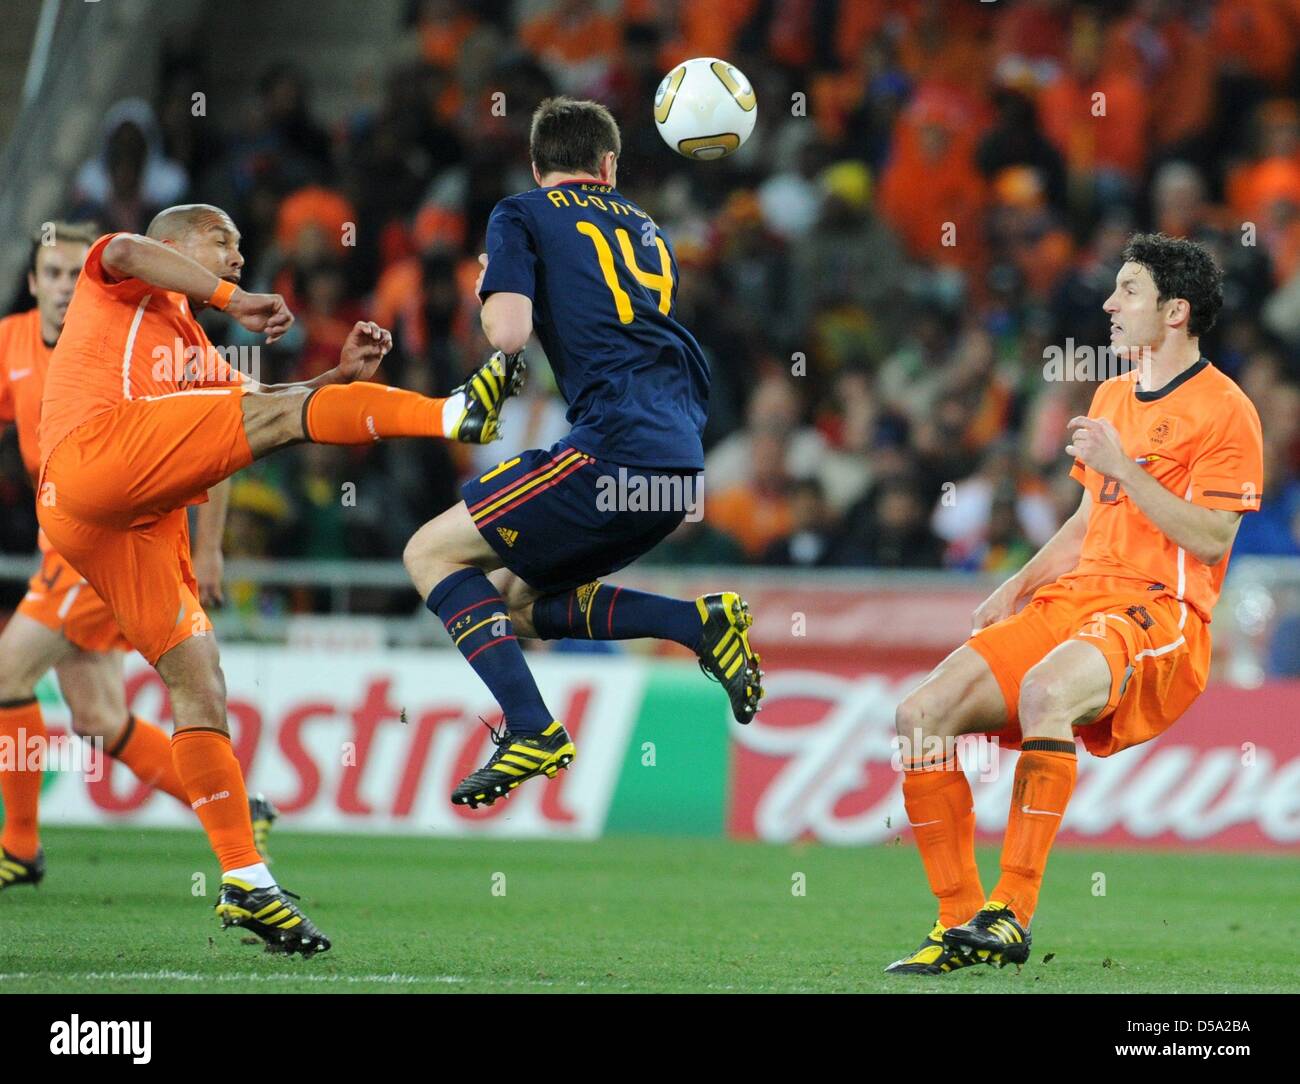 Dutch Nigel de Jong (L) fouls Spain's Xabi Alonso as Dutch Mark van Bommel looks on during the 2010 FIFA World Cup final match between the Netherlands and Spain at Soccer City Stadium in Johannesburg, South Africa 11 July 2010. Photo: Marcus Brandt dpa - Please refer to http://dpaq.de/FIFA-WM2010-TC  +++(c) dpa - Bildfunk+++ Stock Photo